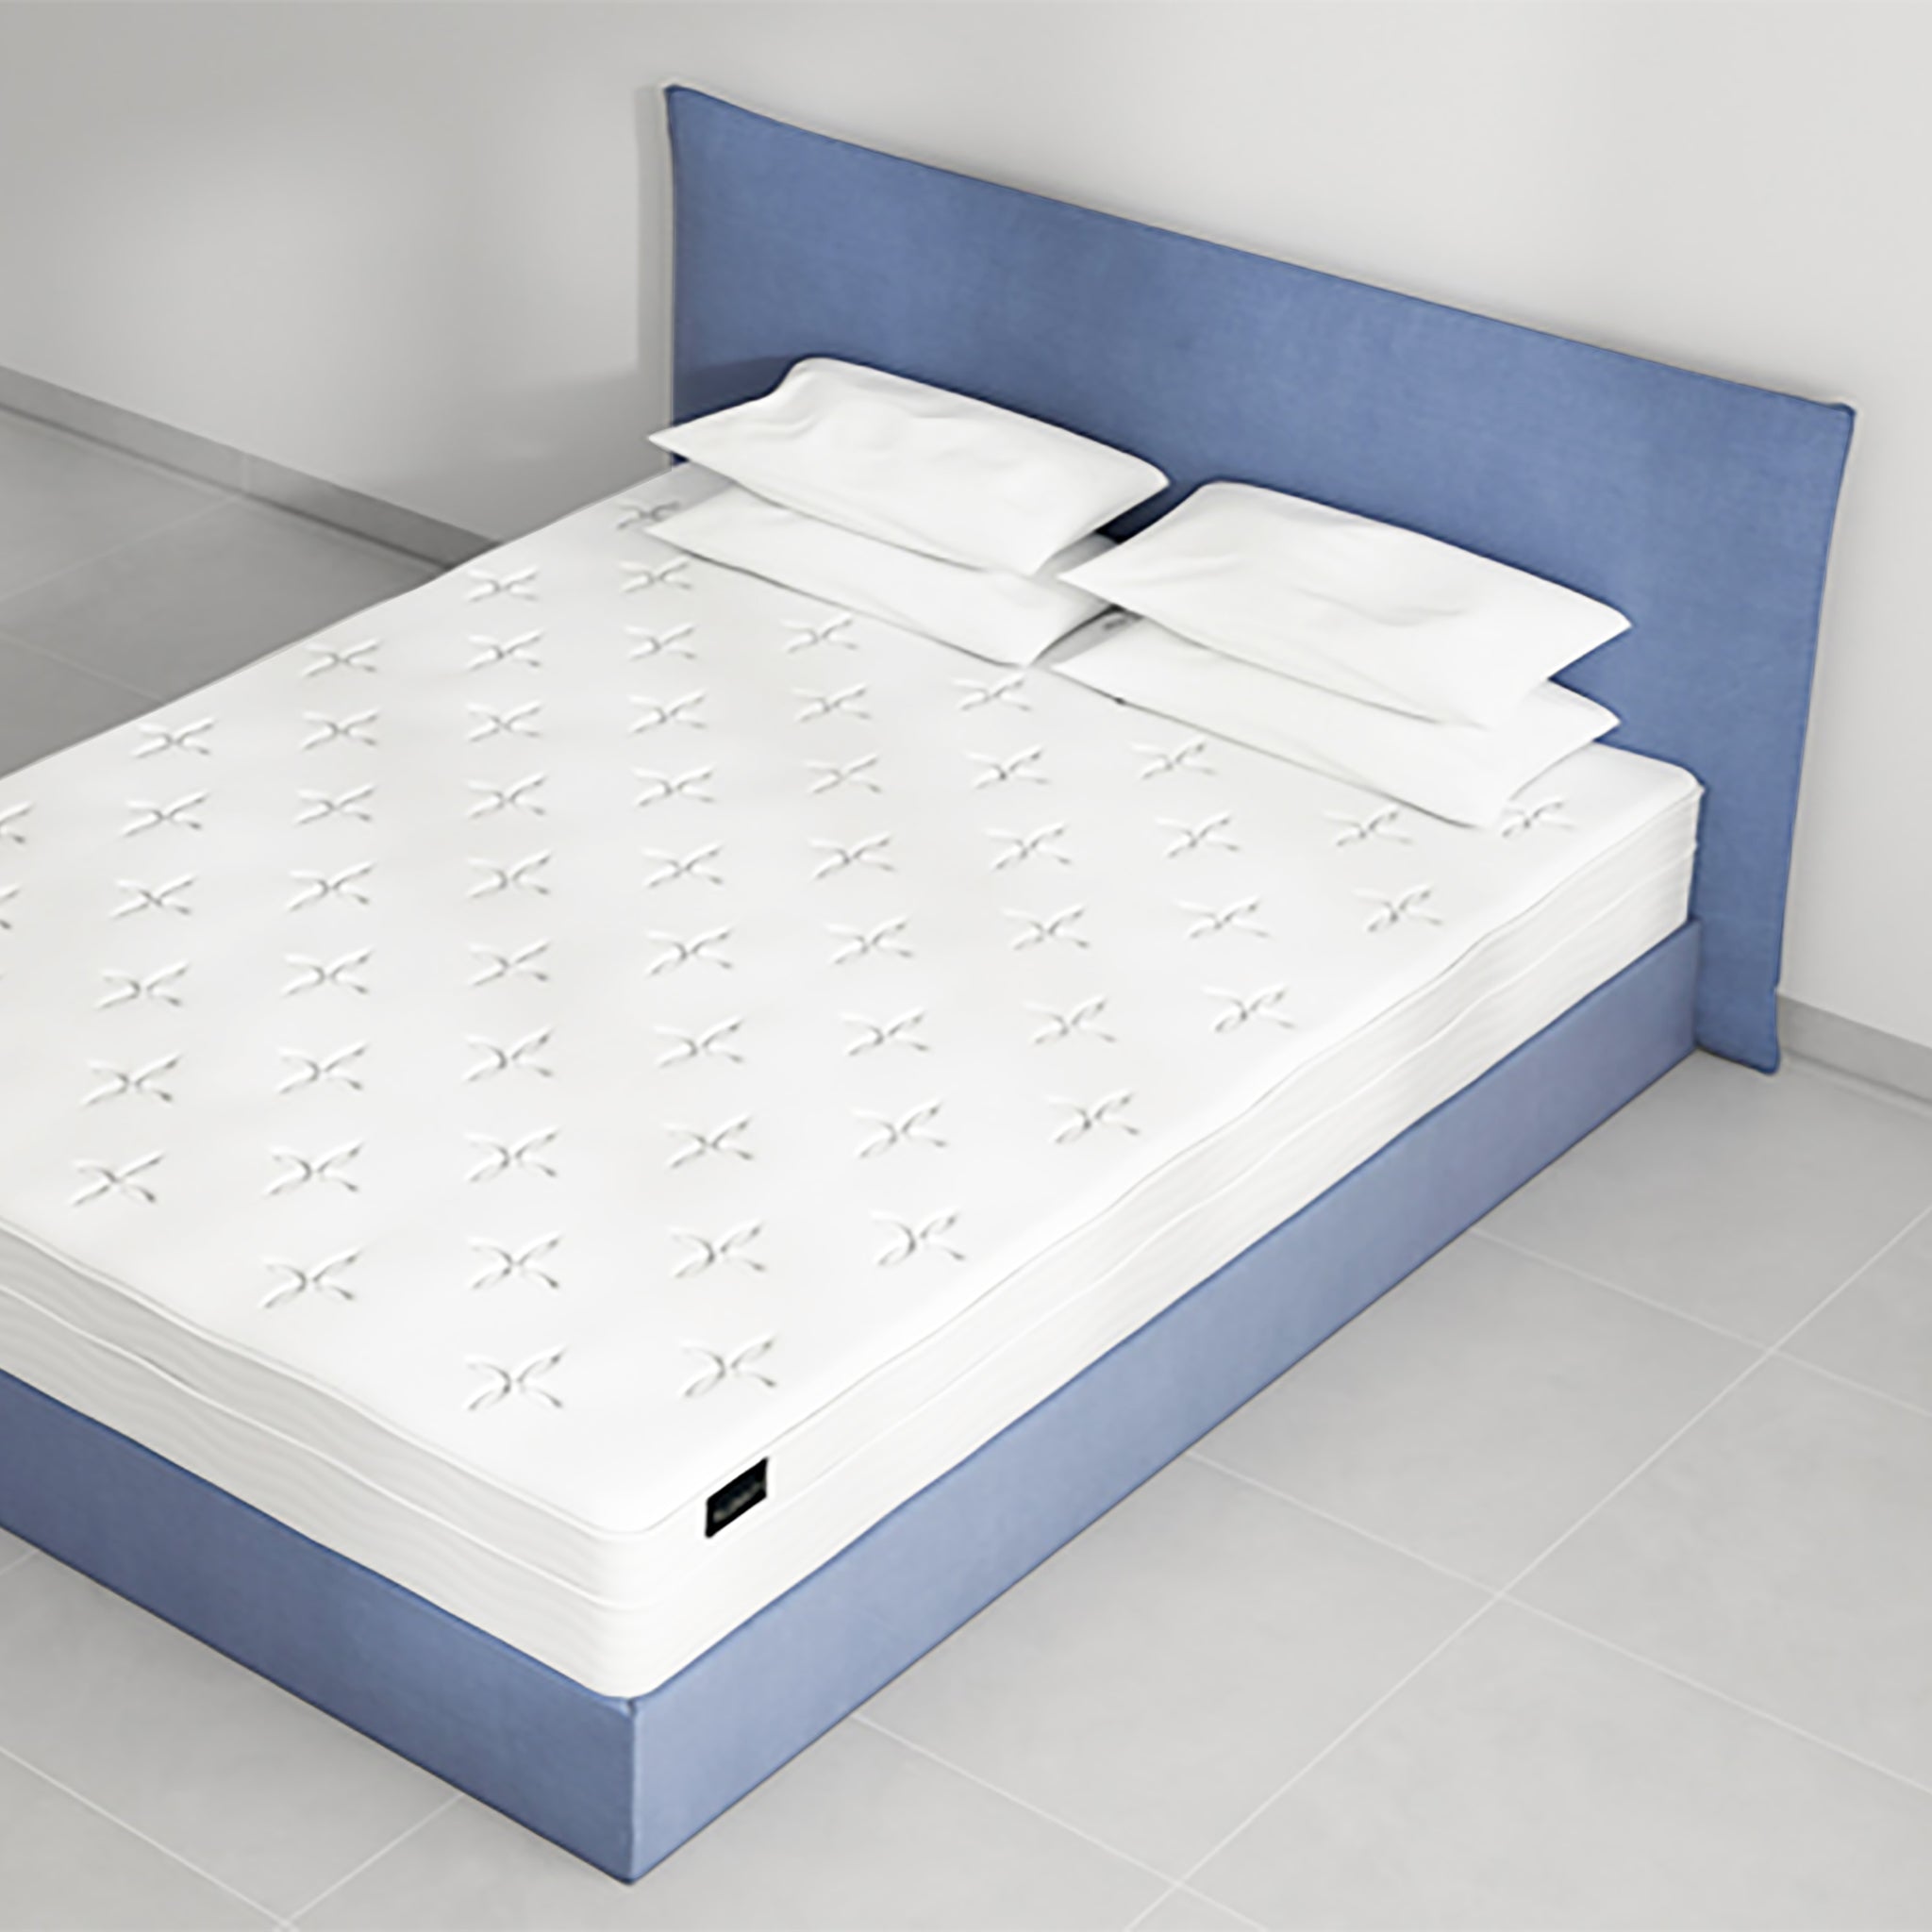 Plush white EuroTop mattress with a knitted top rests on a wooden platform bed frame. The Douglas EuroTop Mattress is 30cm thick and offers pressure relief with its supportive core.